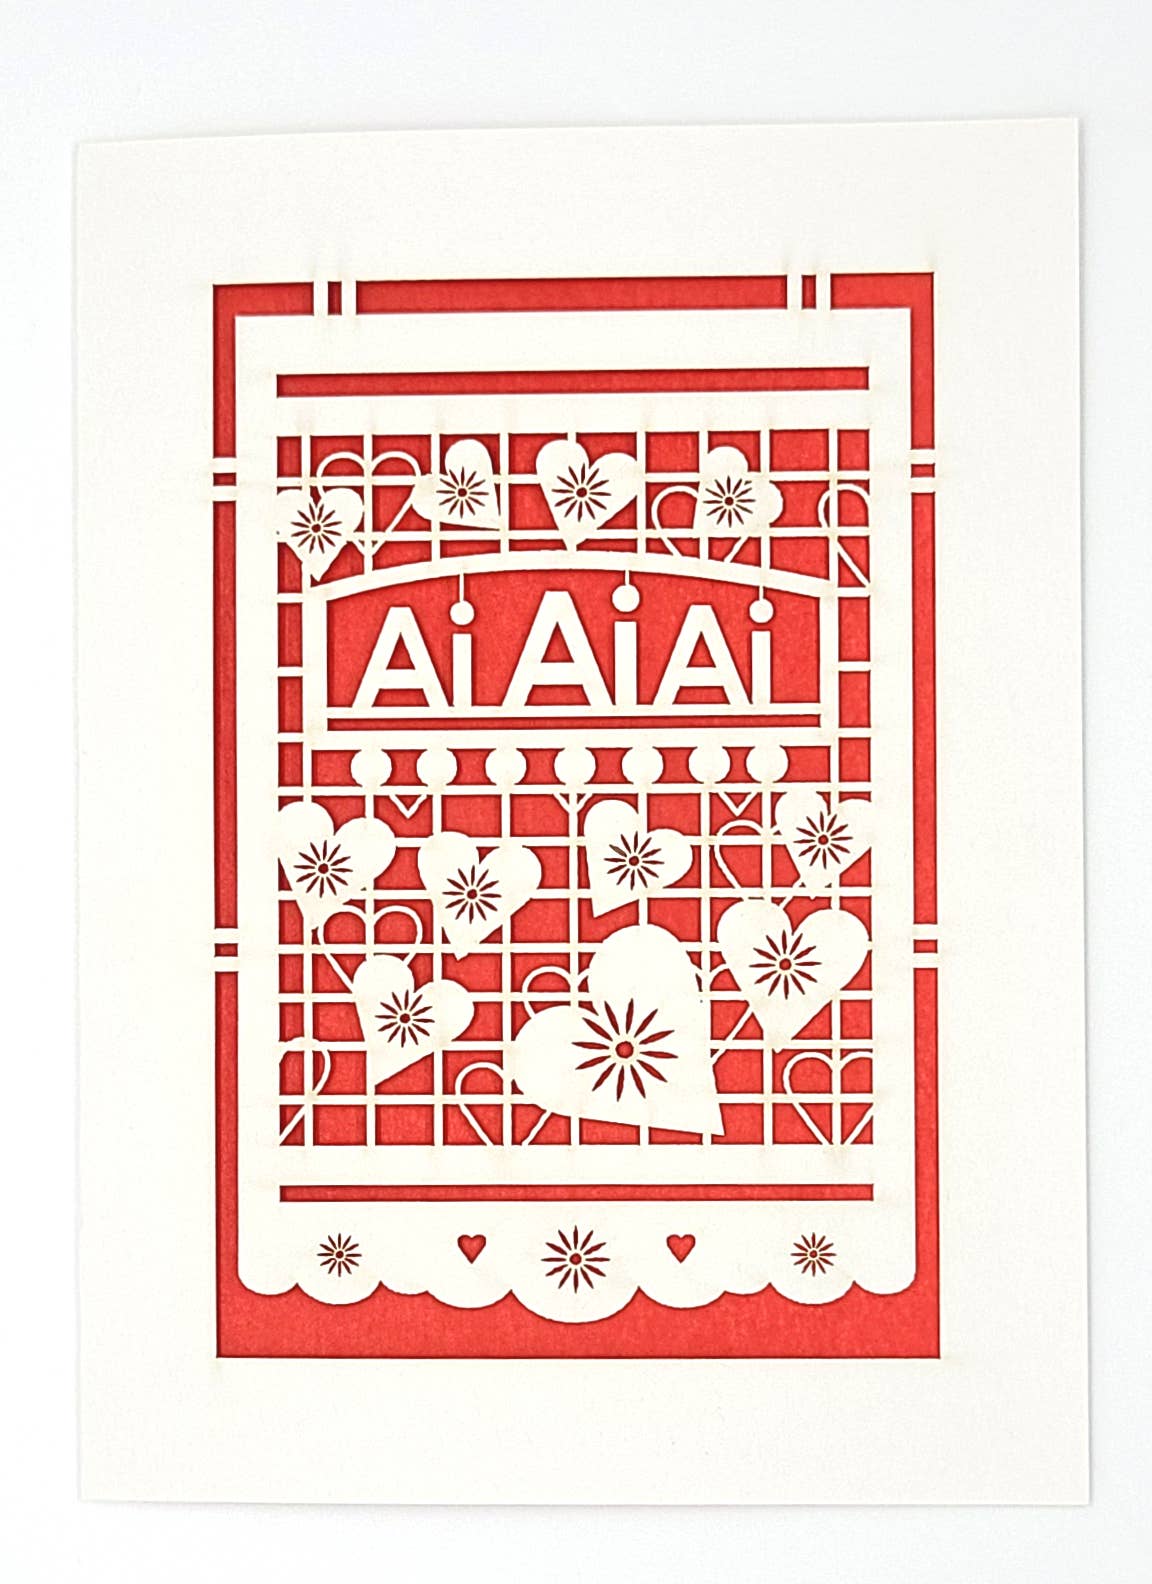 Greeting card with a laser cut image of hearts on white with red background